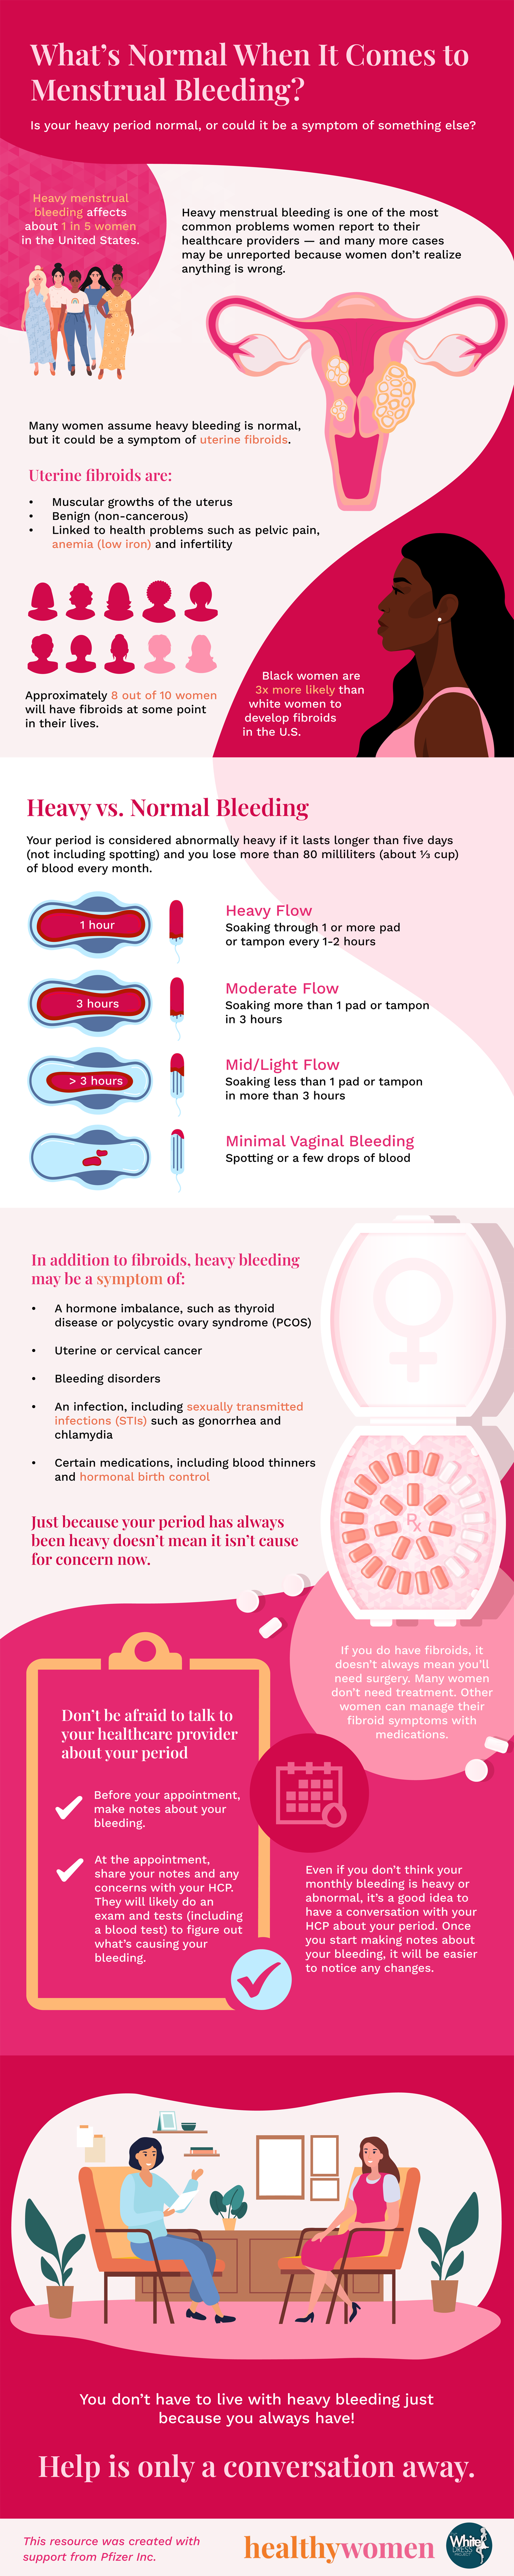 What’s Normal When It Comes to Menstrual Bleeding? infographic